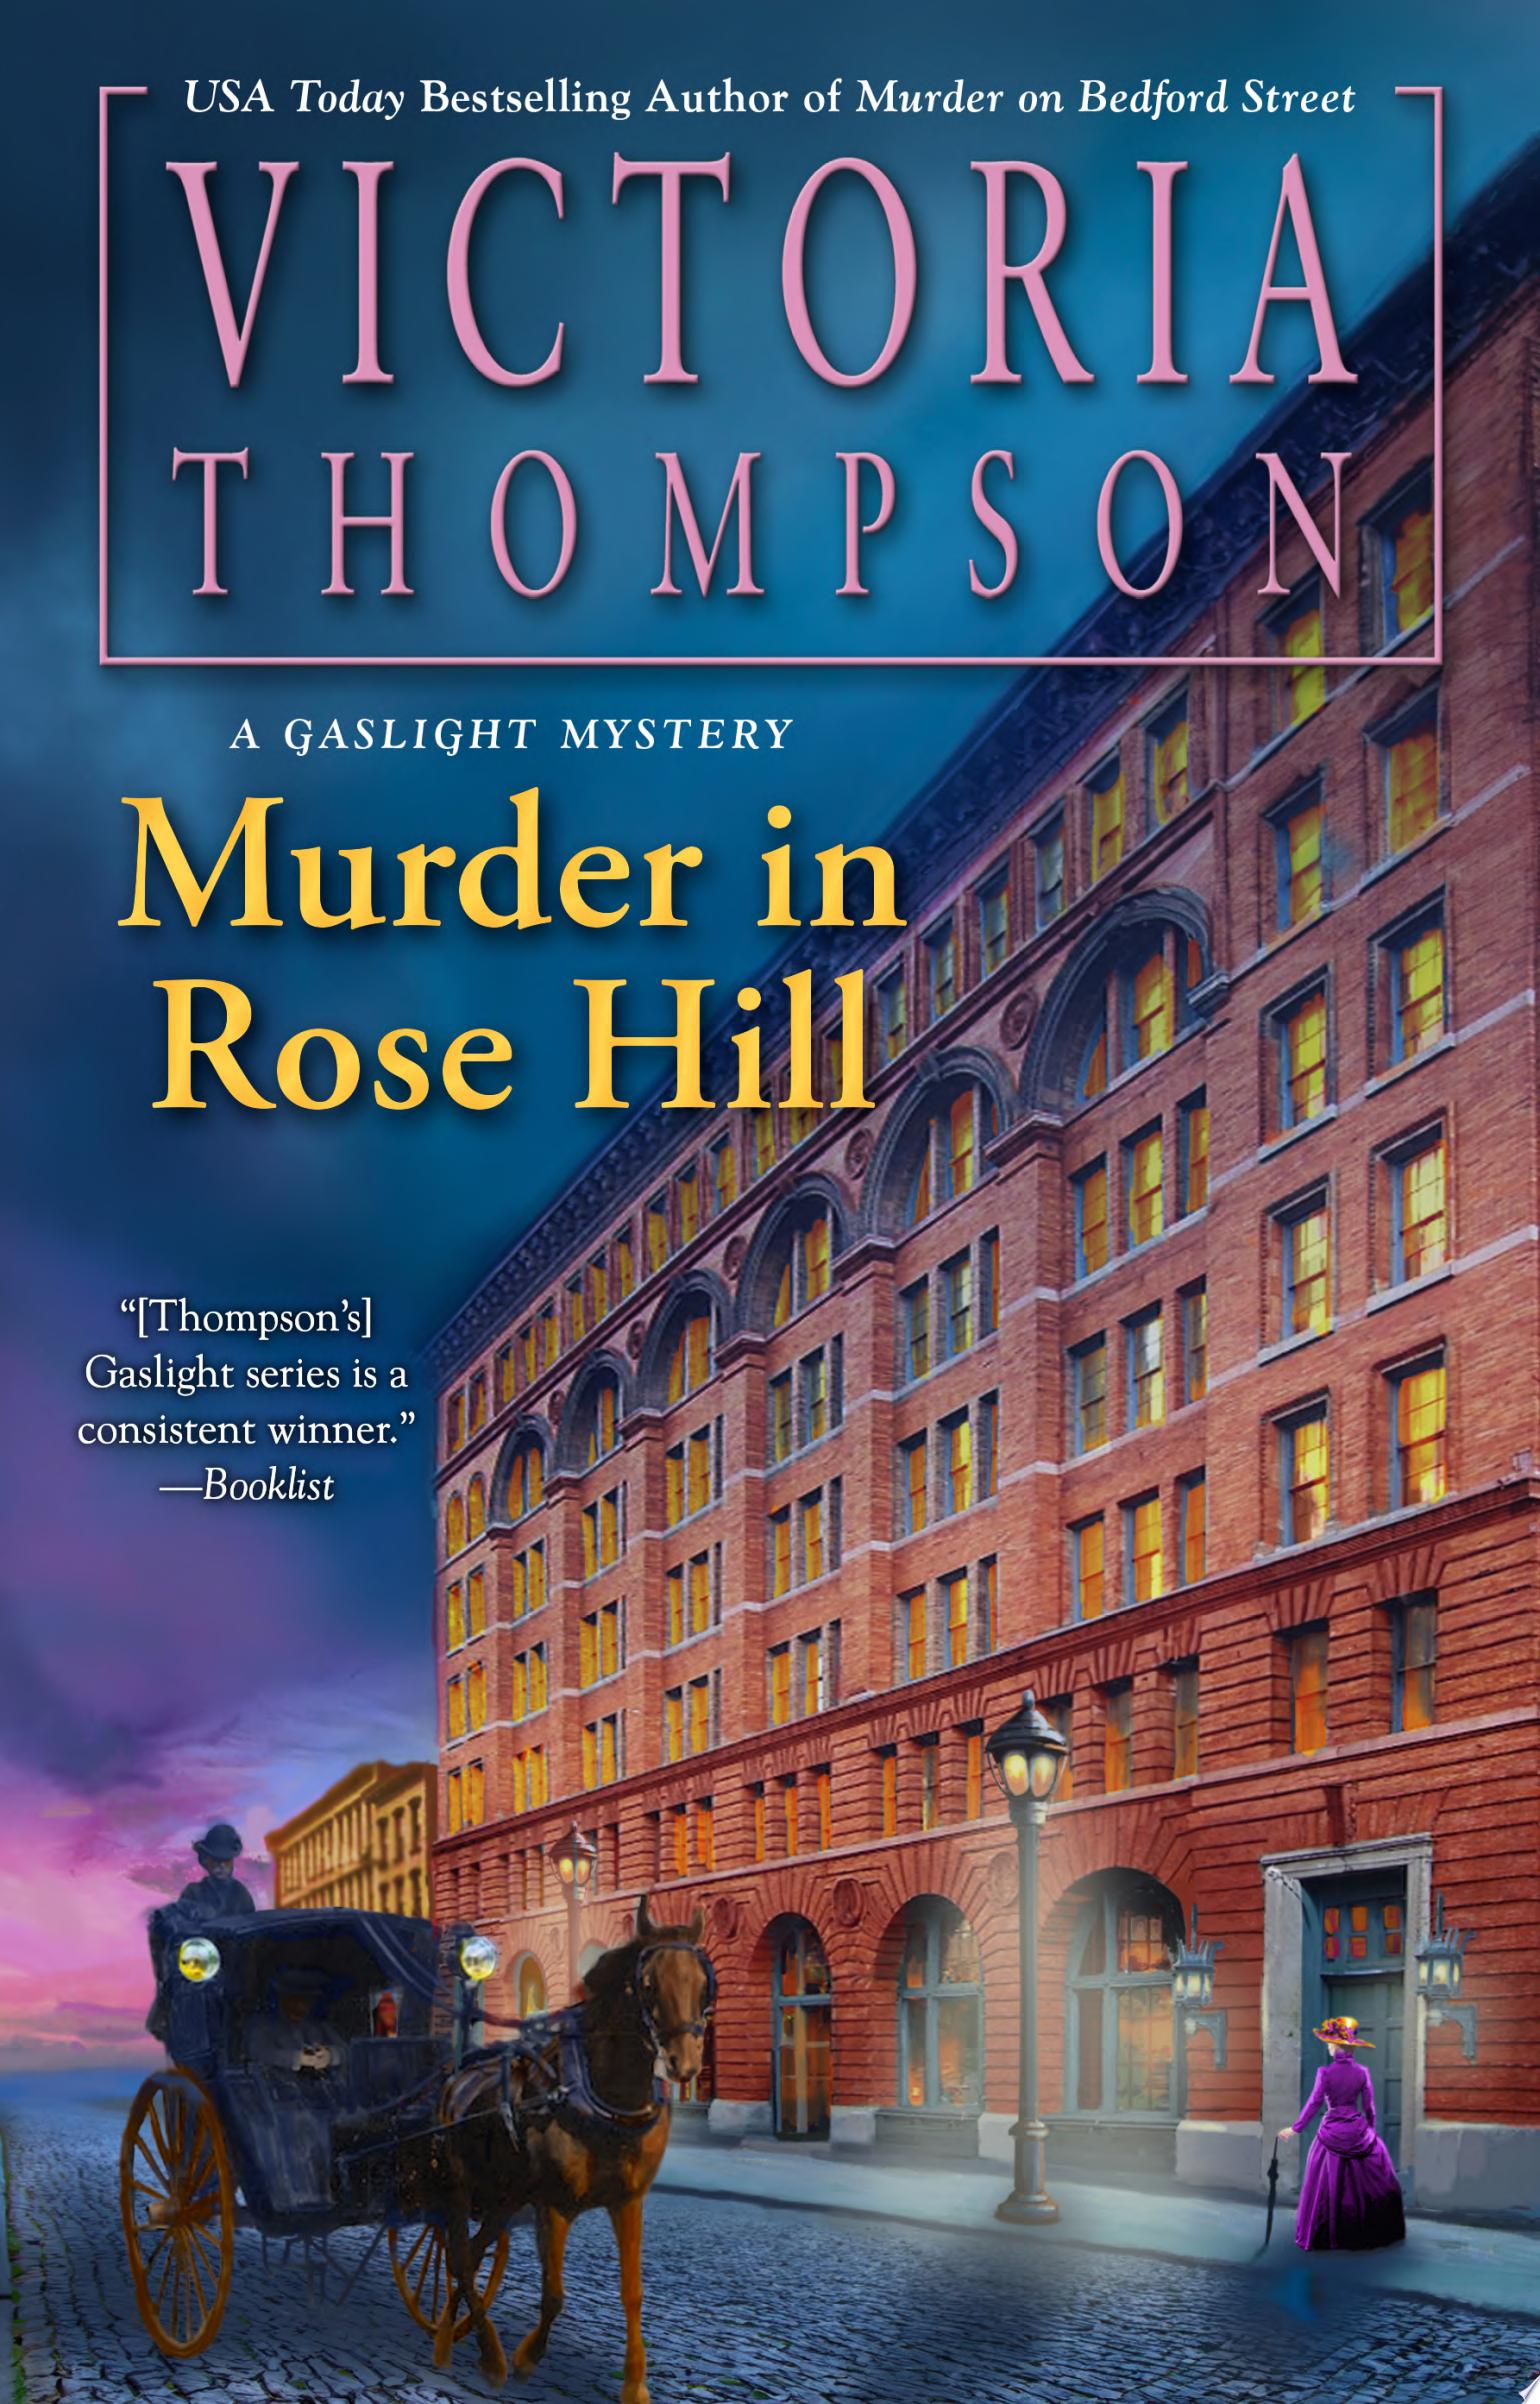 Image for "Murder in Rose Hill"